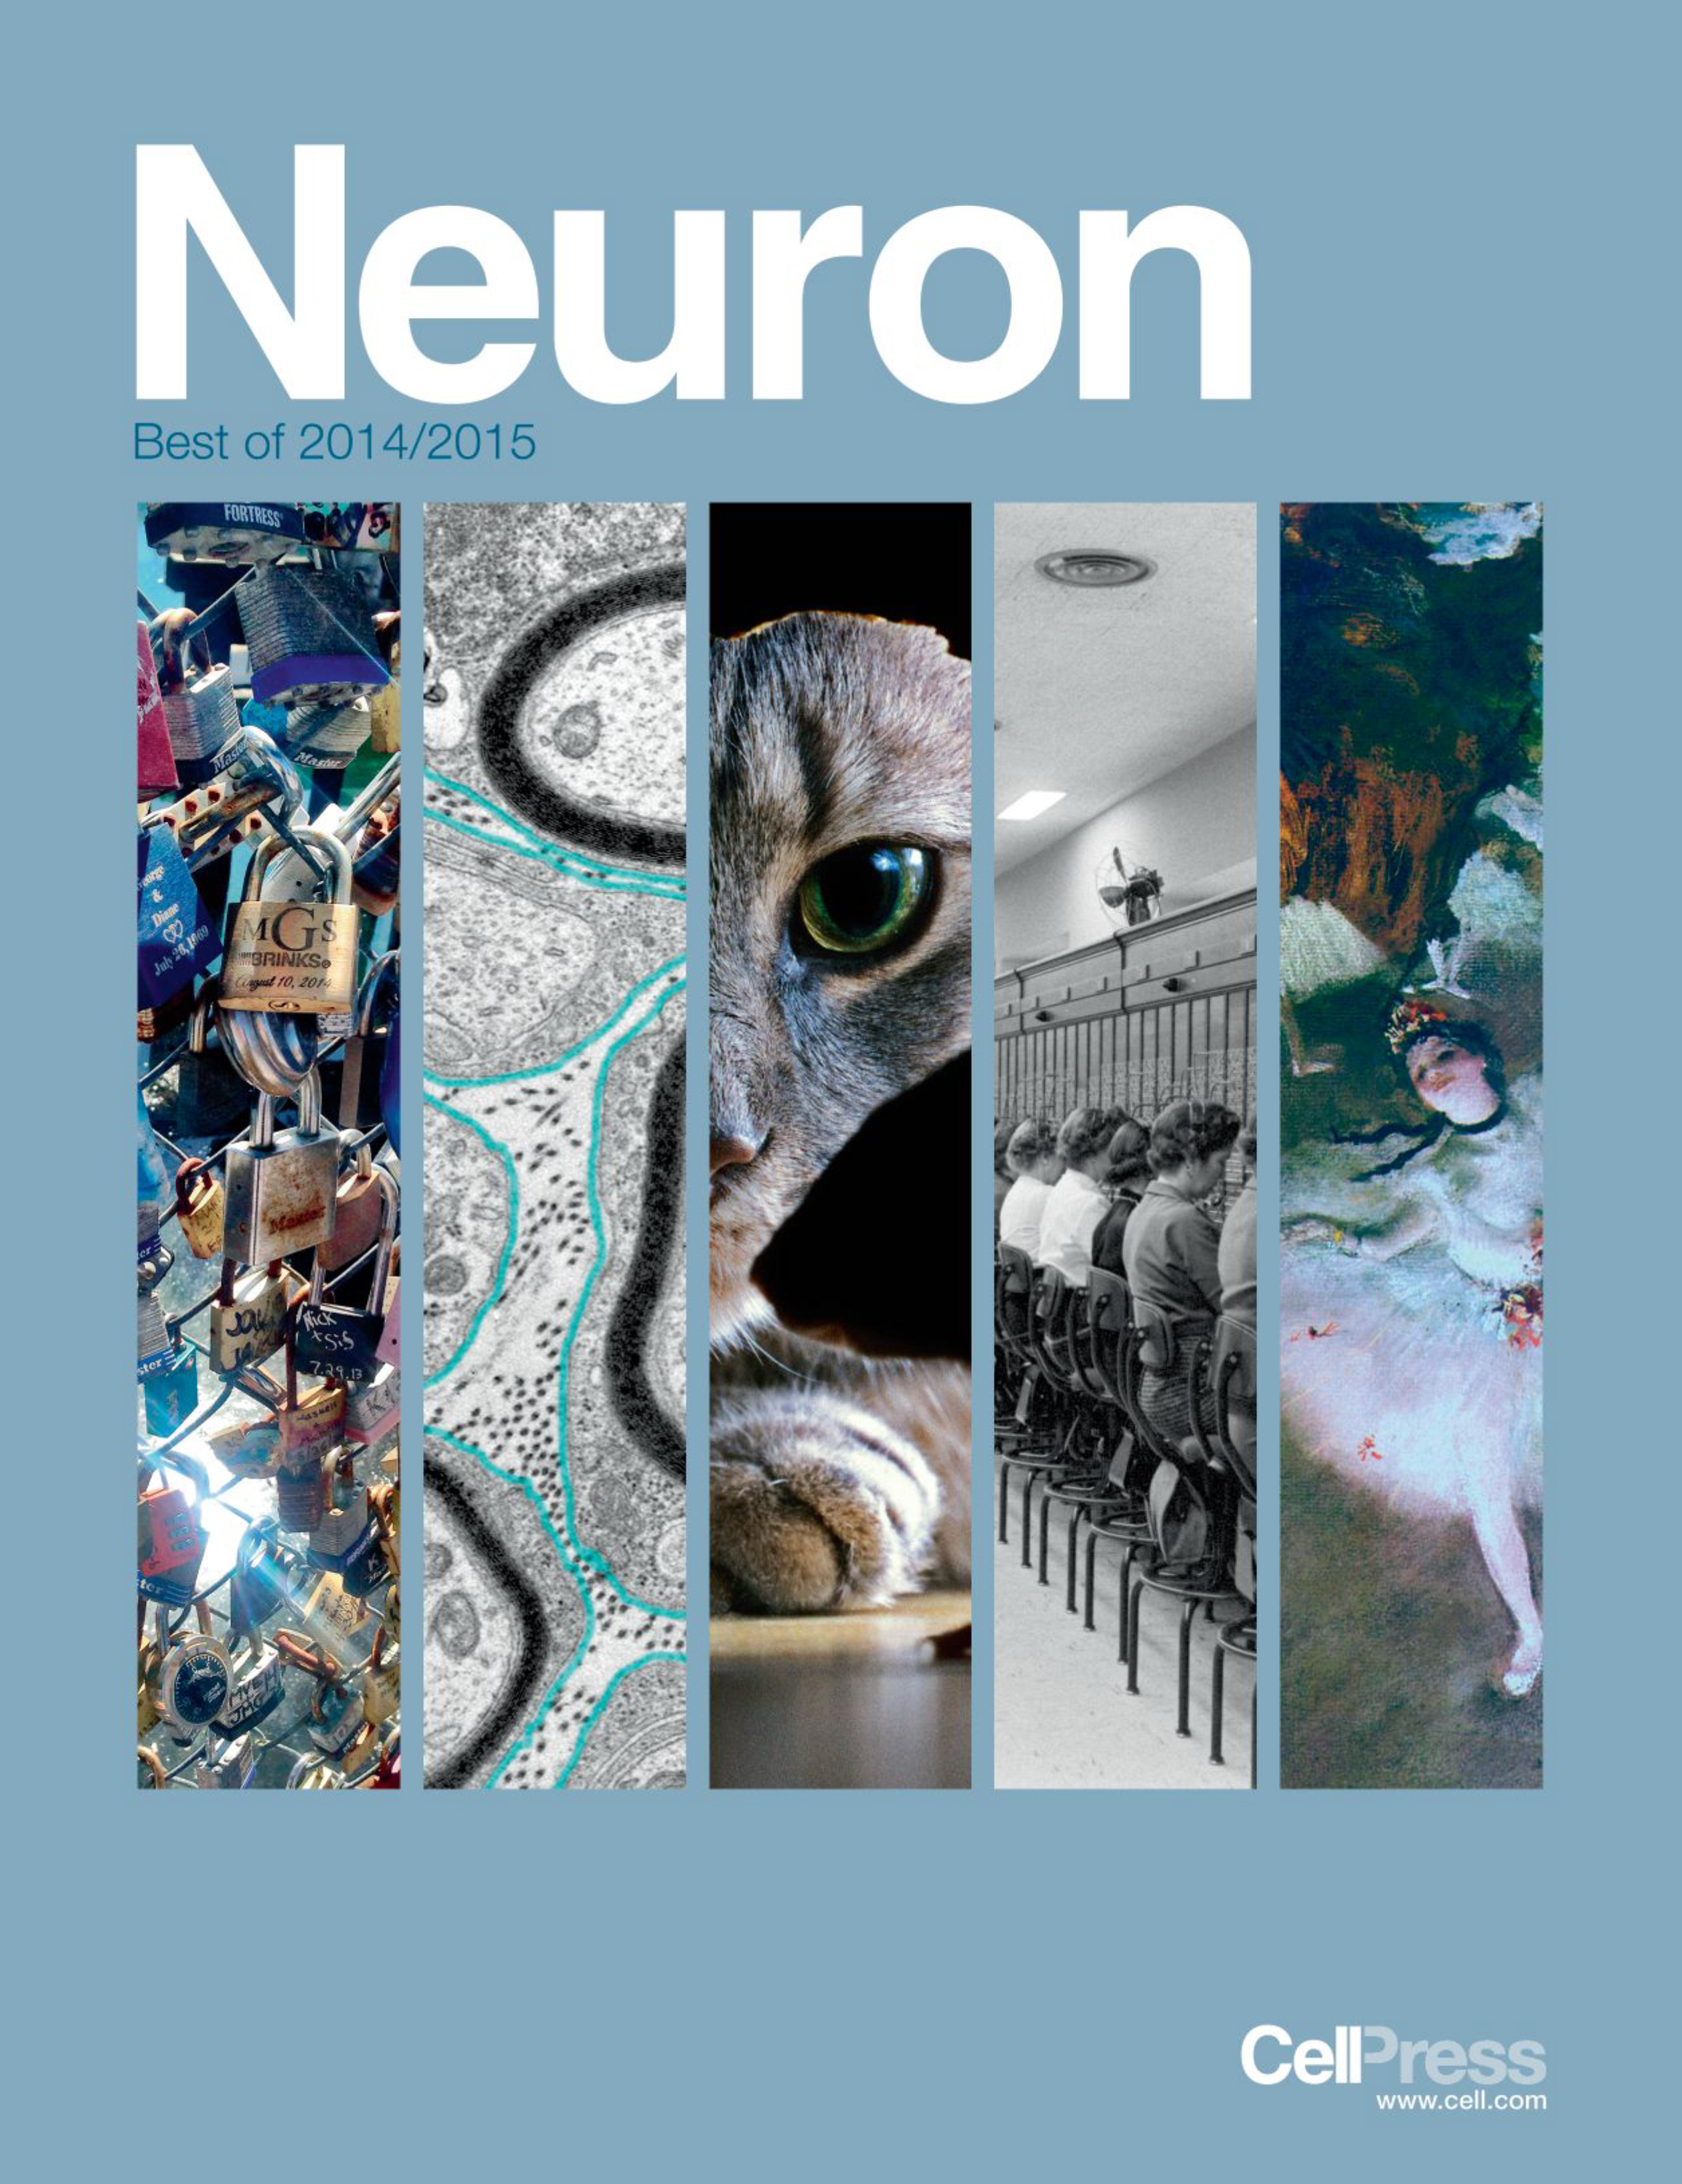 Two papers make 'Best of Neuron' list